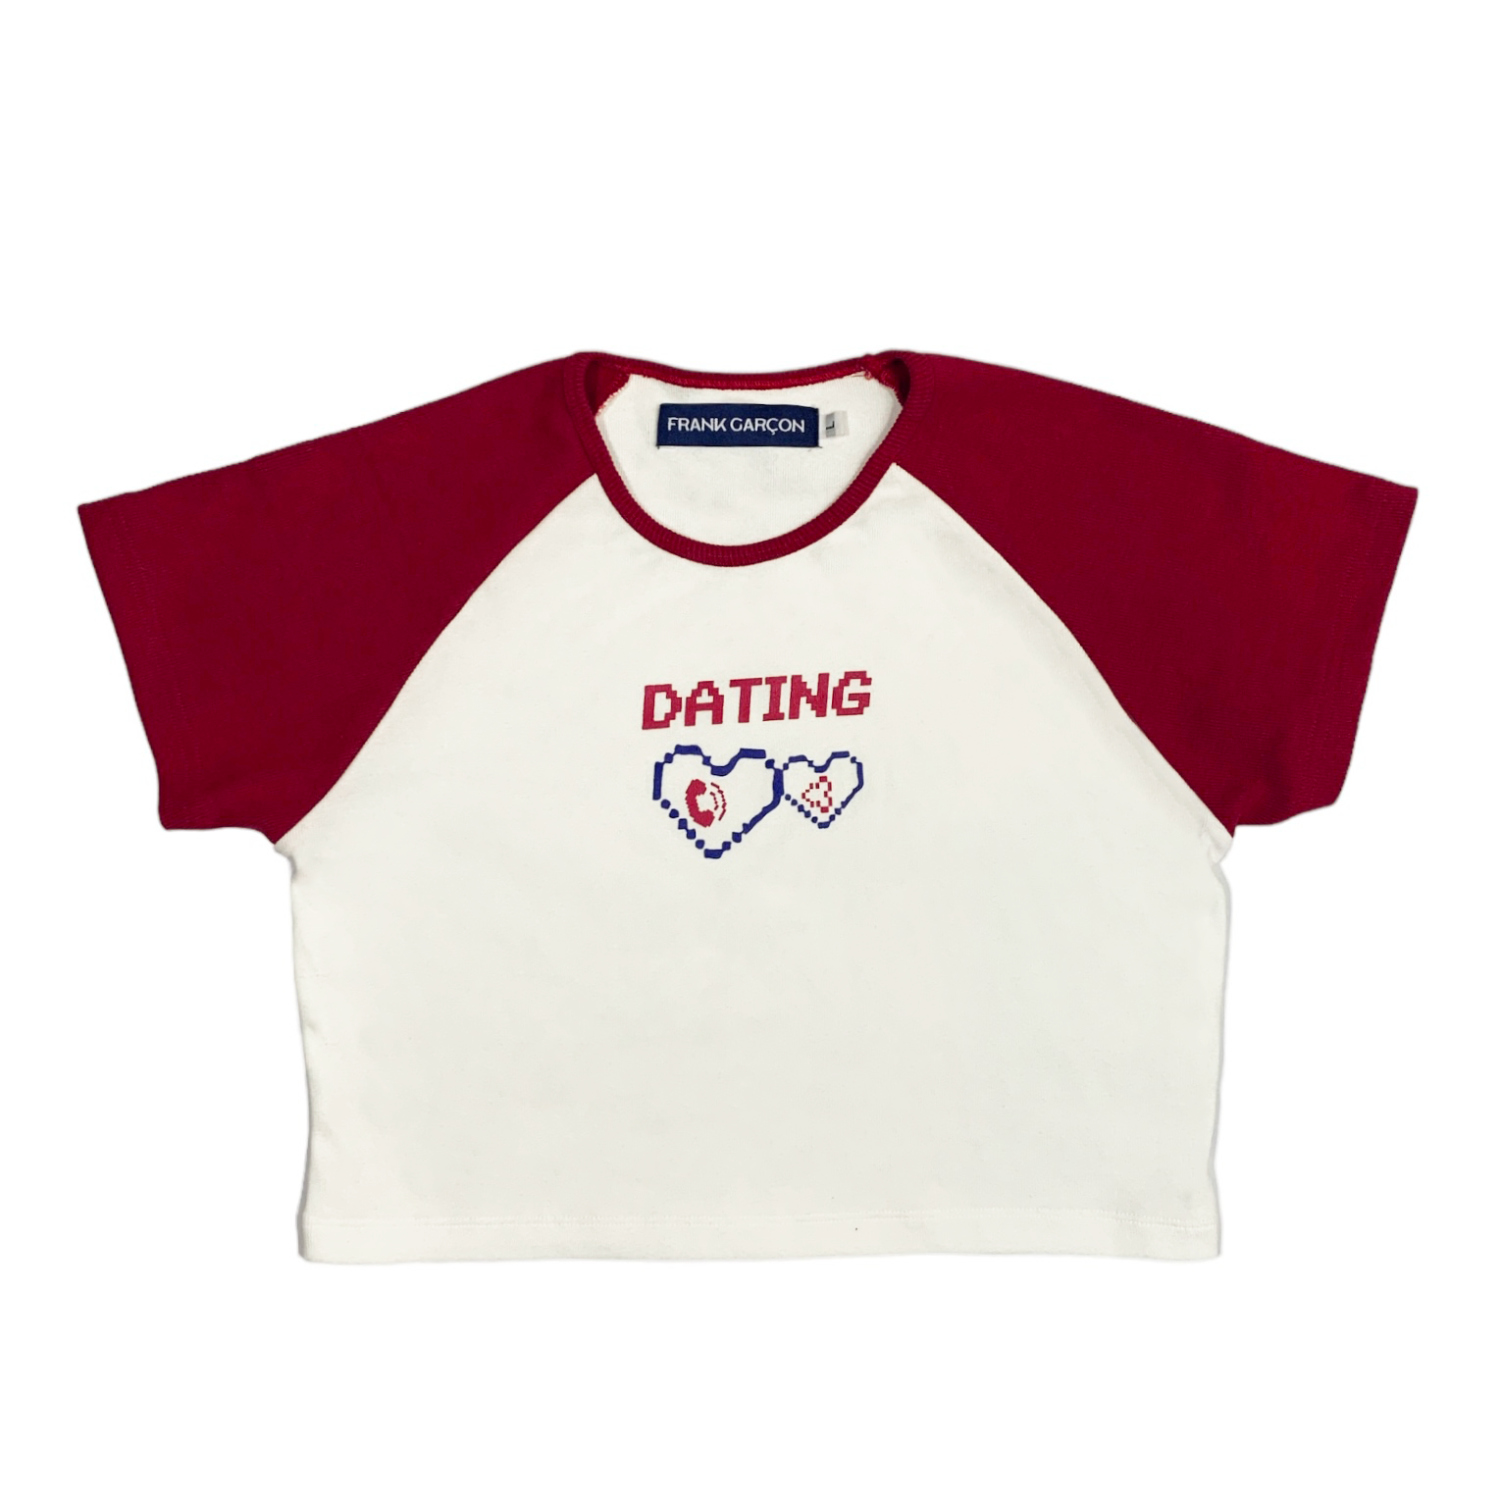 Dating Telecom Baby Tee (White/Red)